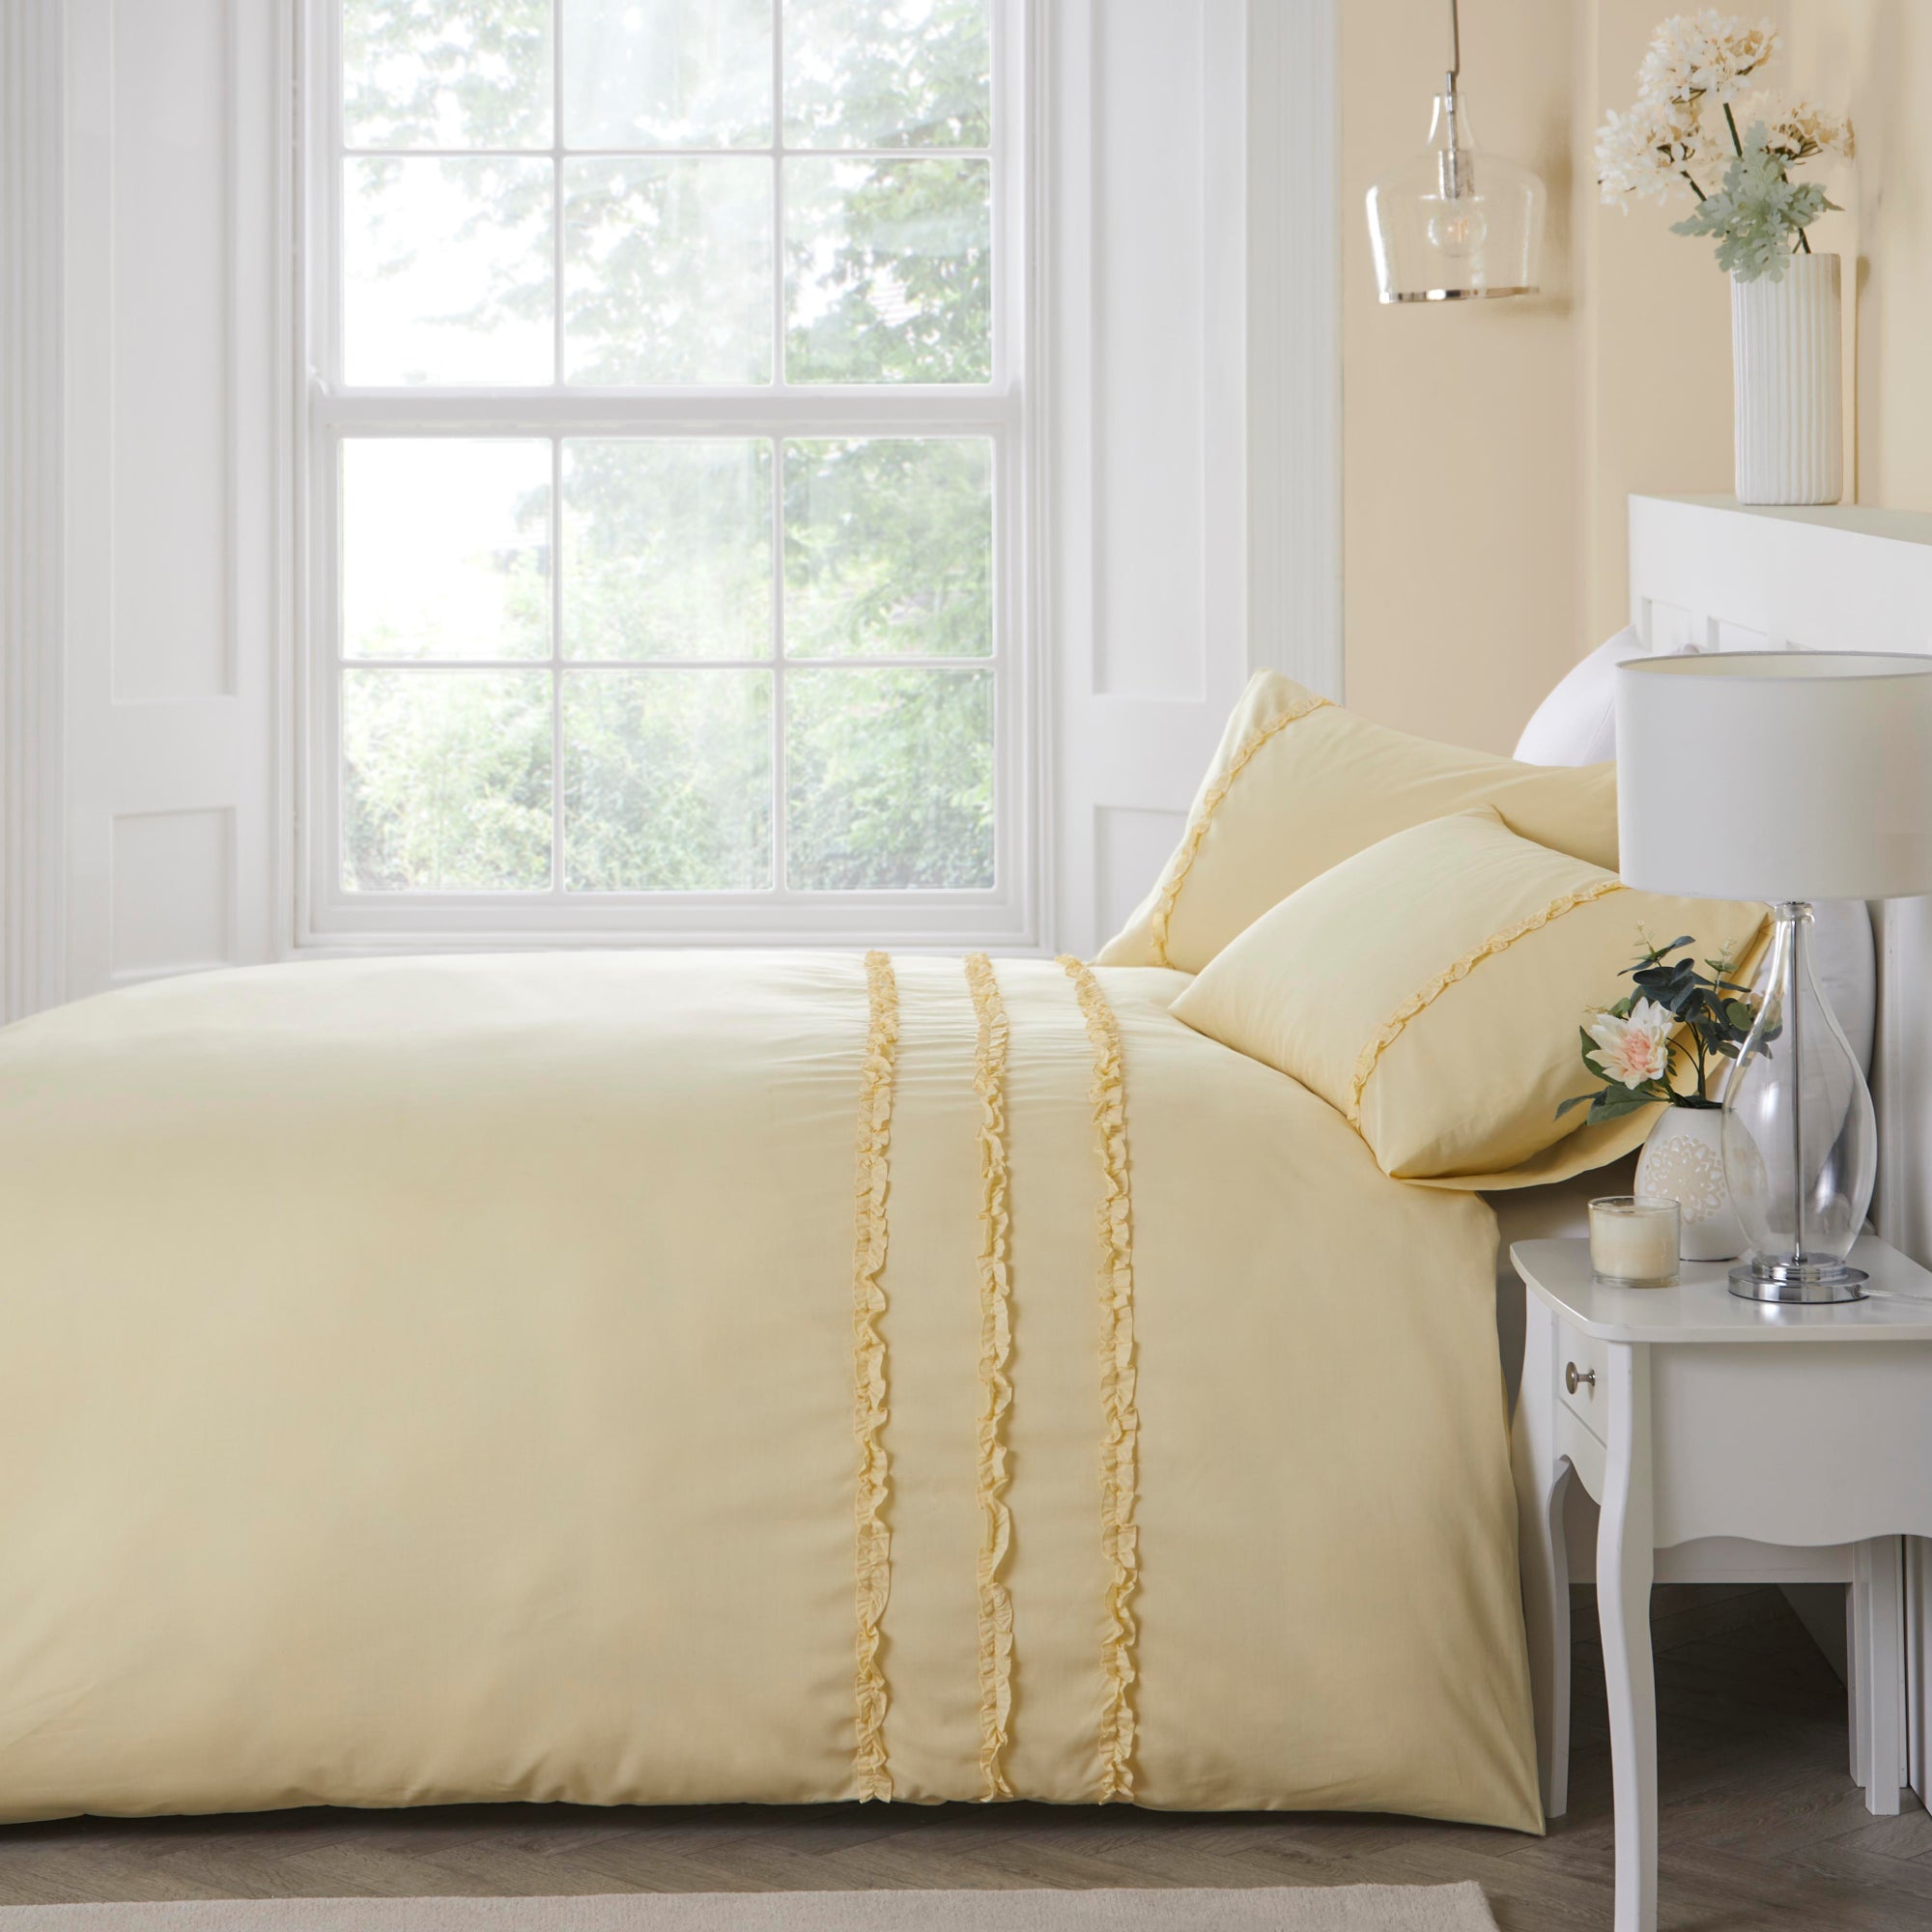 Duvet Cover Set Felicia Frill by Serene in Yellow